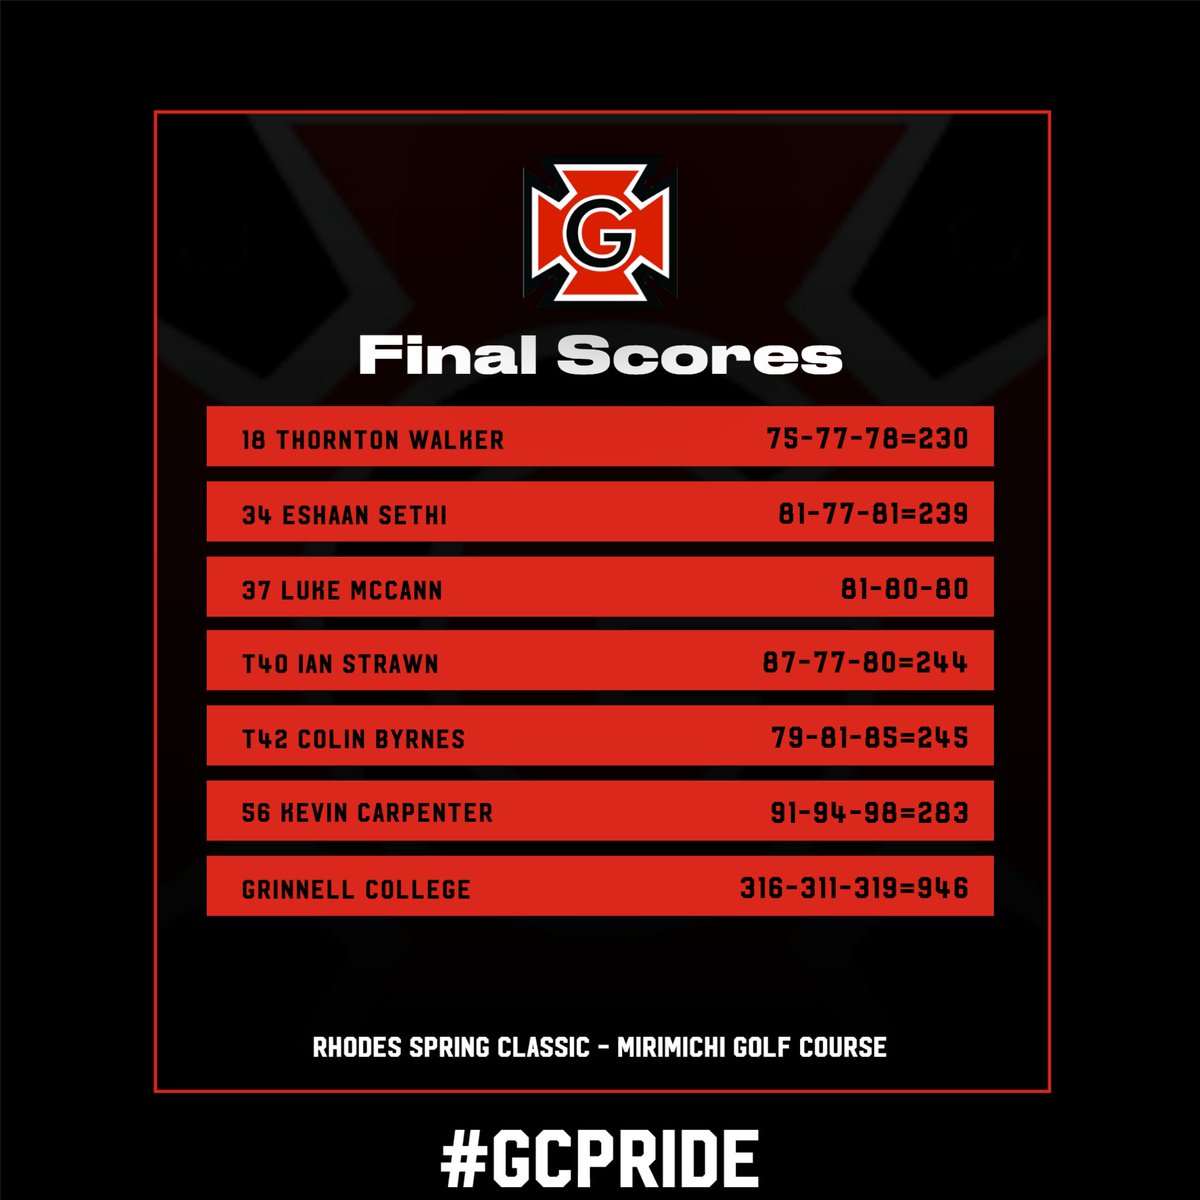 Here's how the fellas wrapped up in Memphis. A strong second round led to a tie for 7th place overall. Thornton Walker paced the team with a top-20 finish. Back in action this weekend in Galesburg, IL. #GCPride